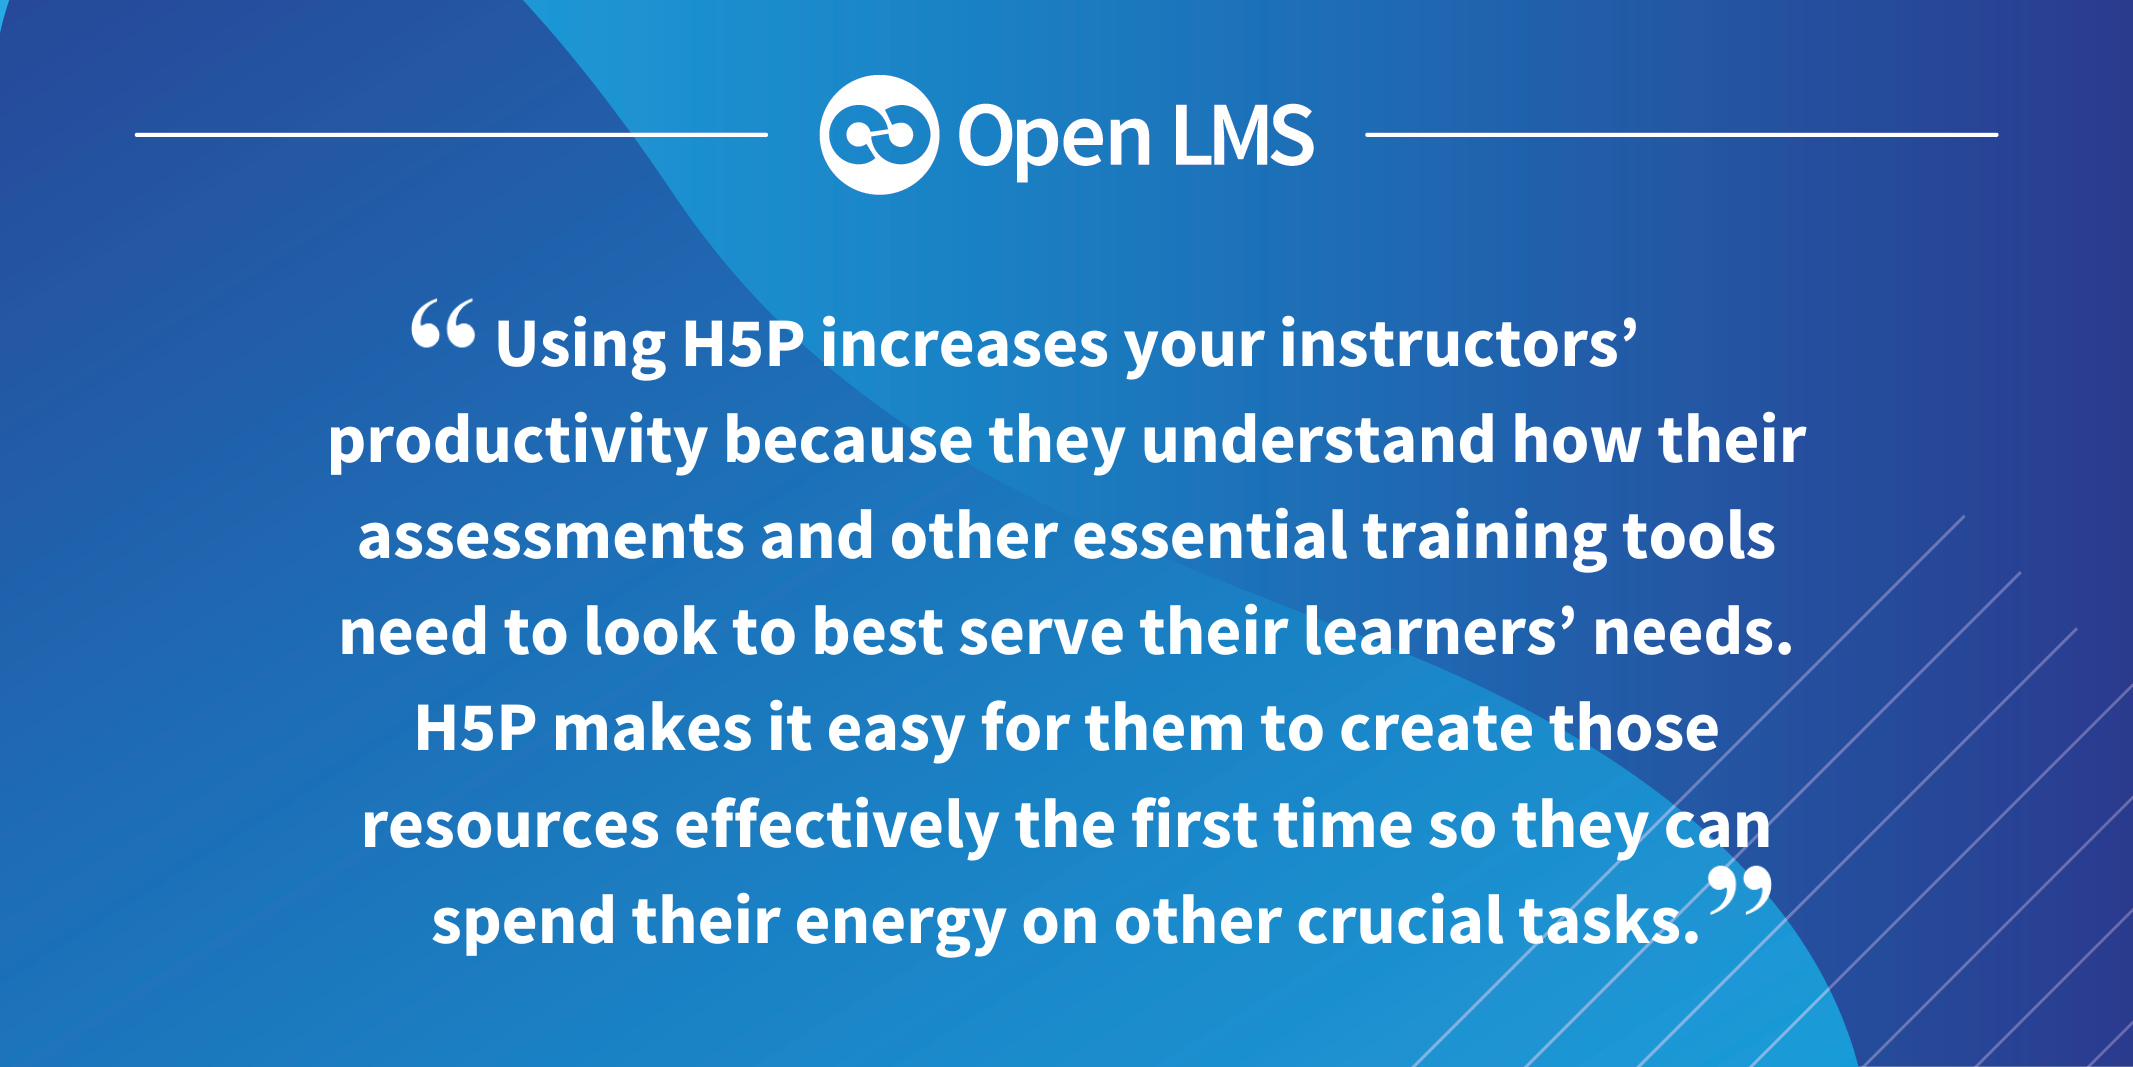 Q1 - 5 Ways to Improve Productivity With Features and Tools From Open LMS